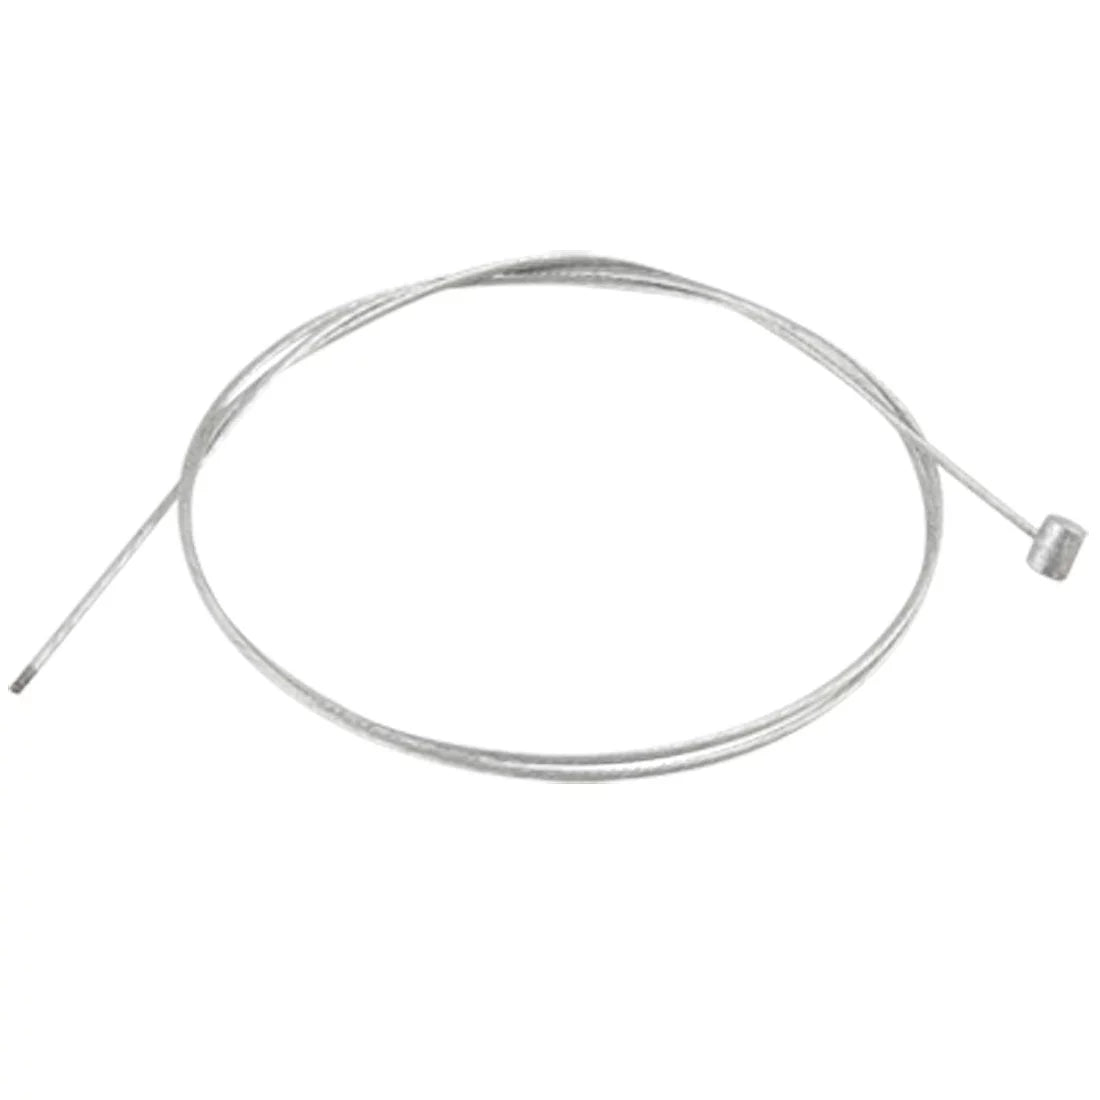 Generic brake cable (pack of 5)